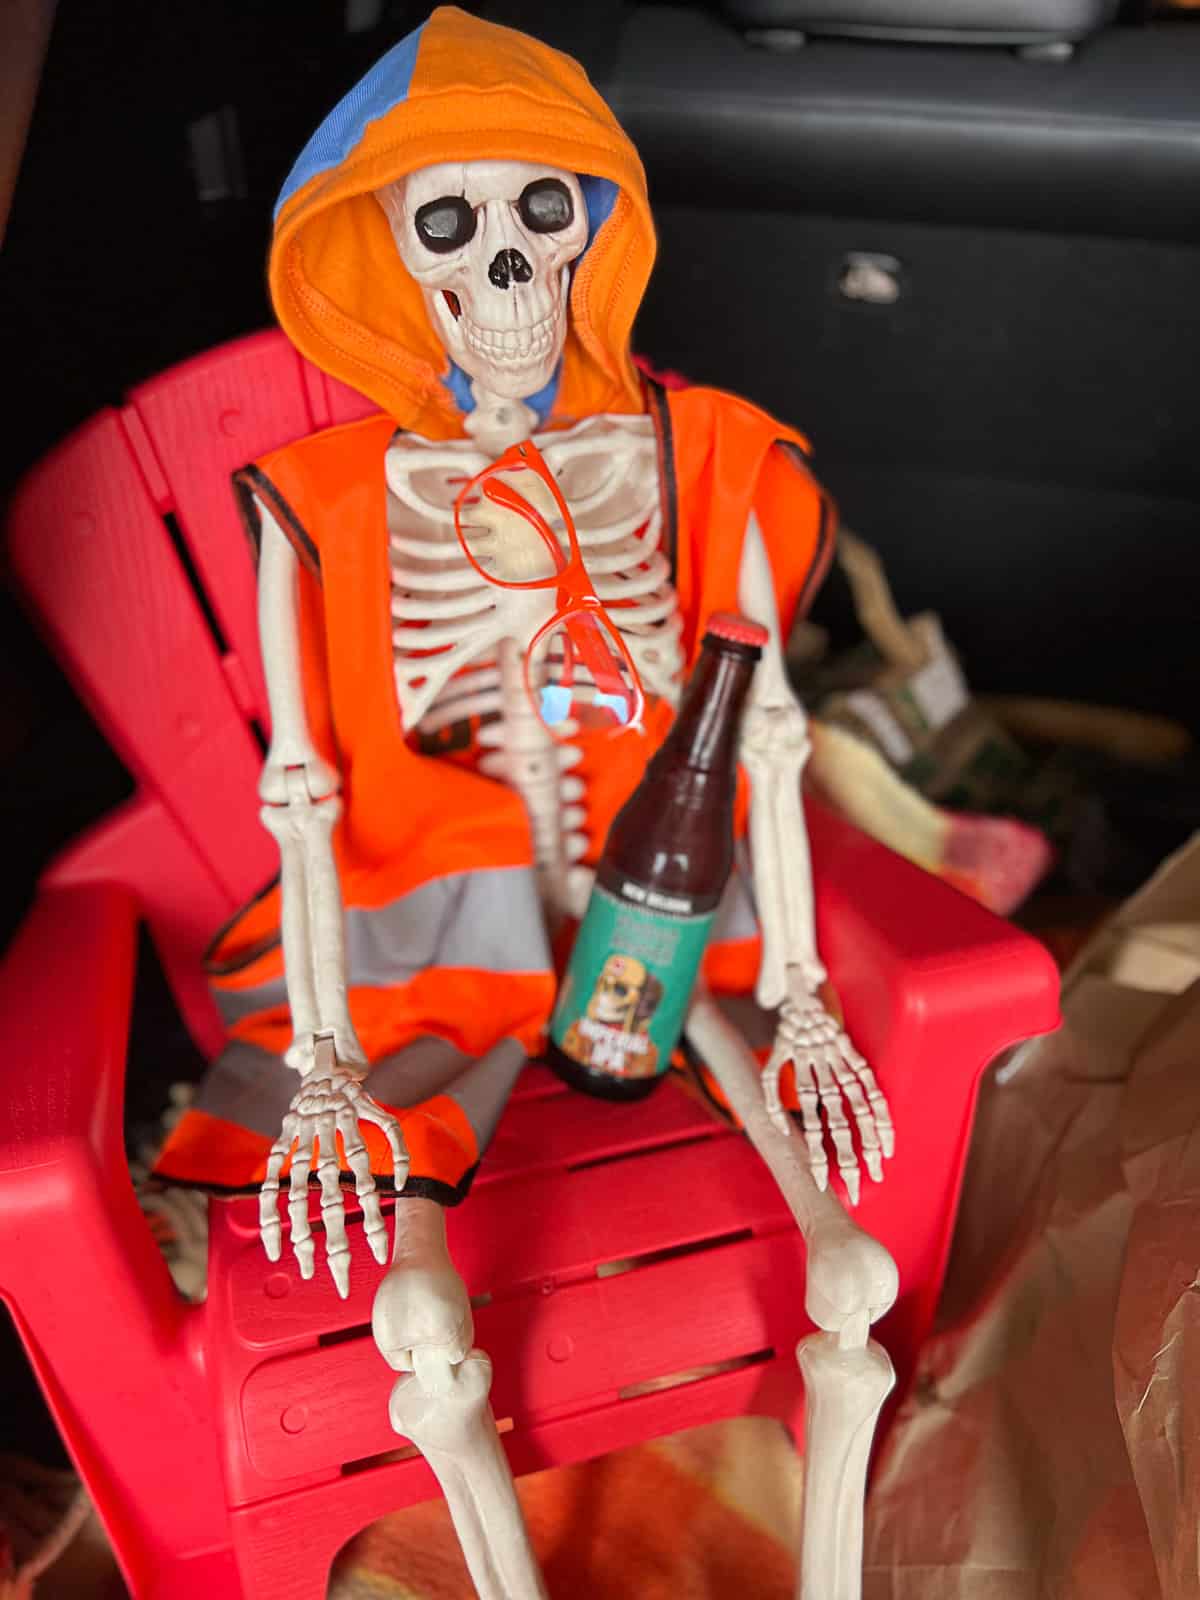 campsite halloween trunk or treat decor with a skeleton dressed as Blippi